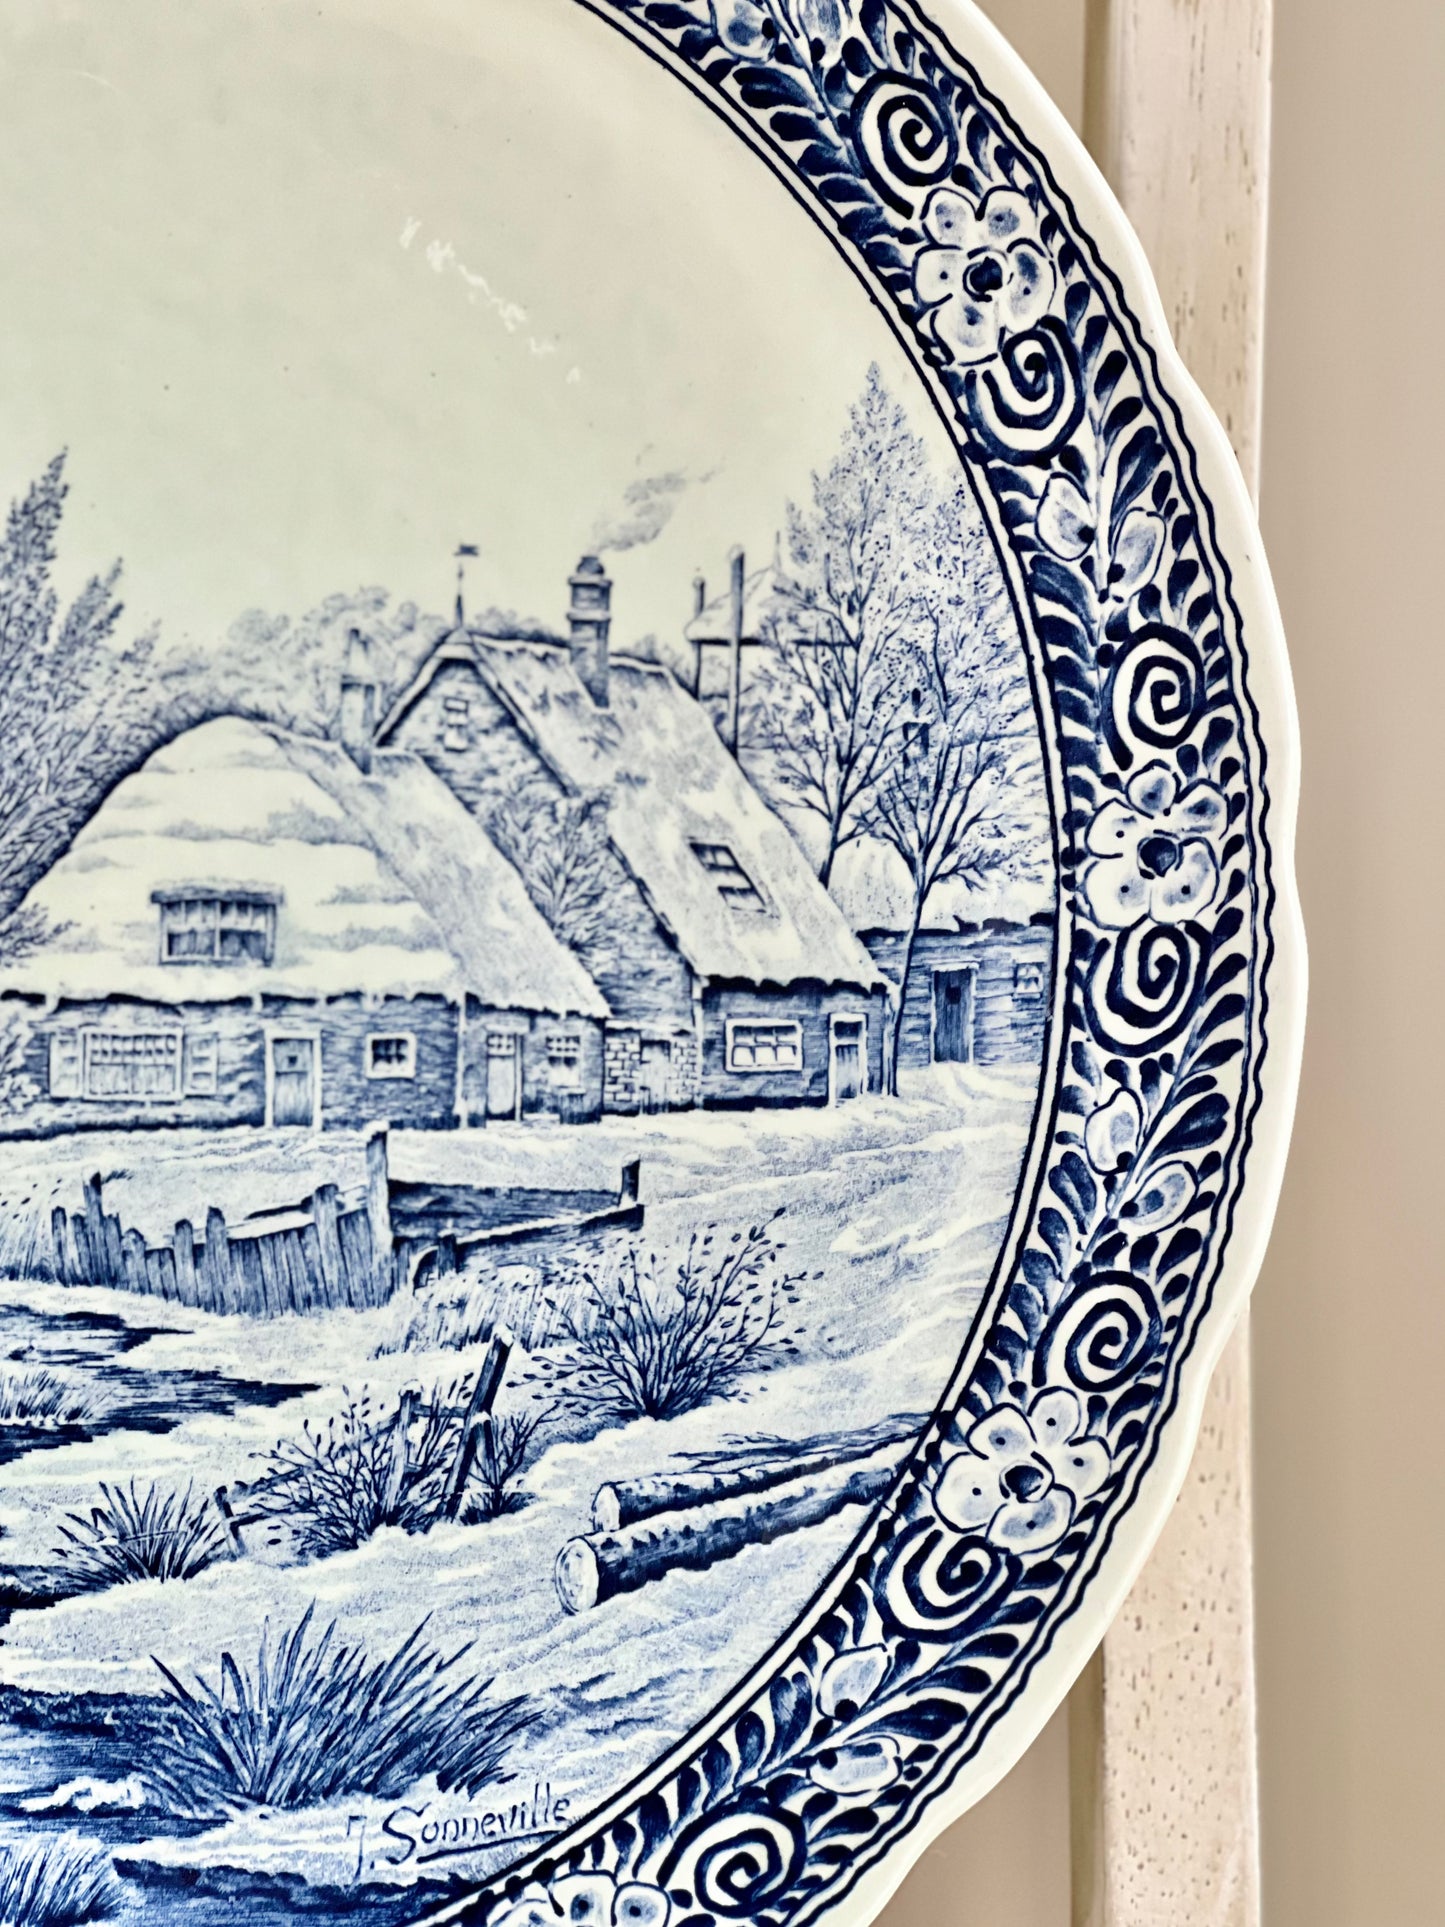 Large Vintage Delfts Boch Royal Sphinx 15” Blue & White Wall Charger, Wintry River Scene